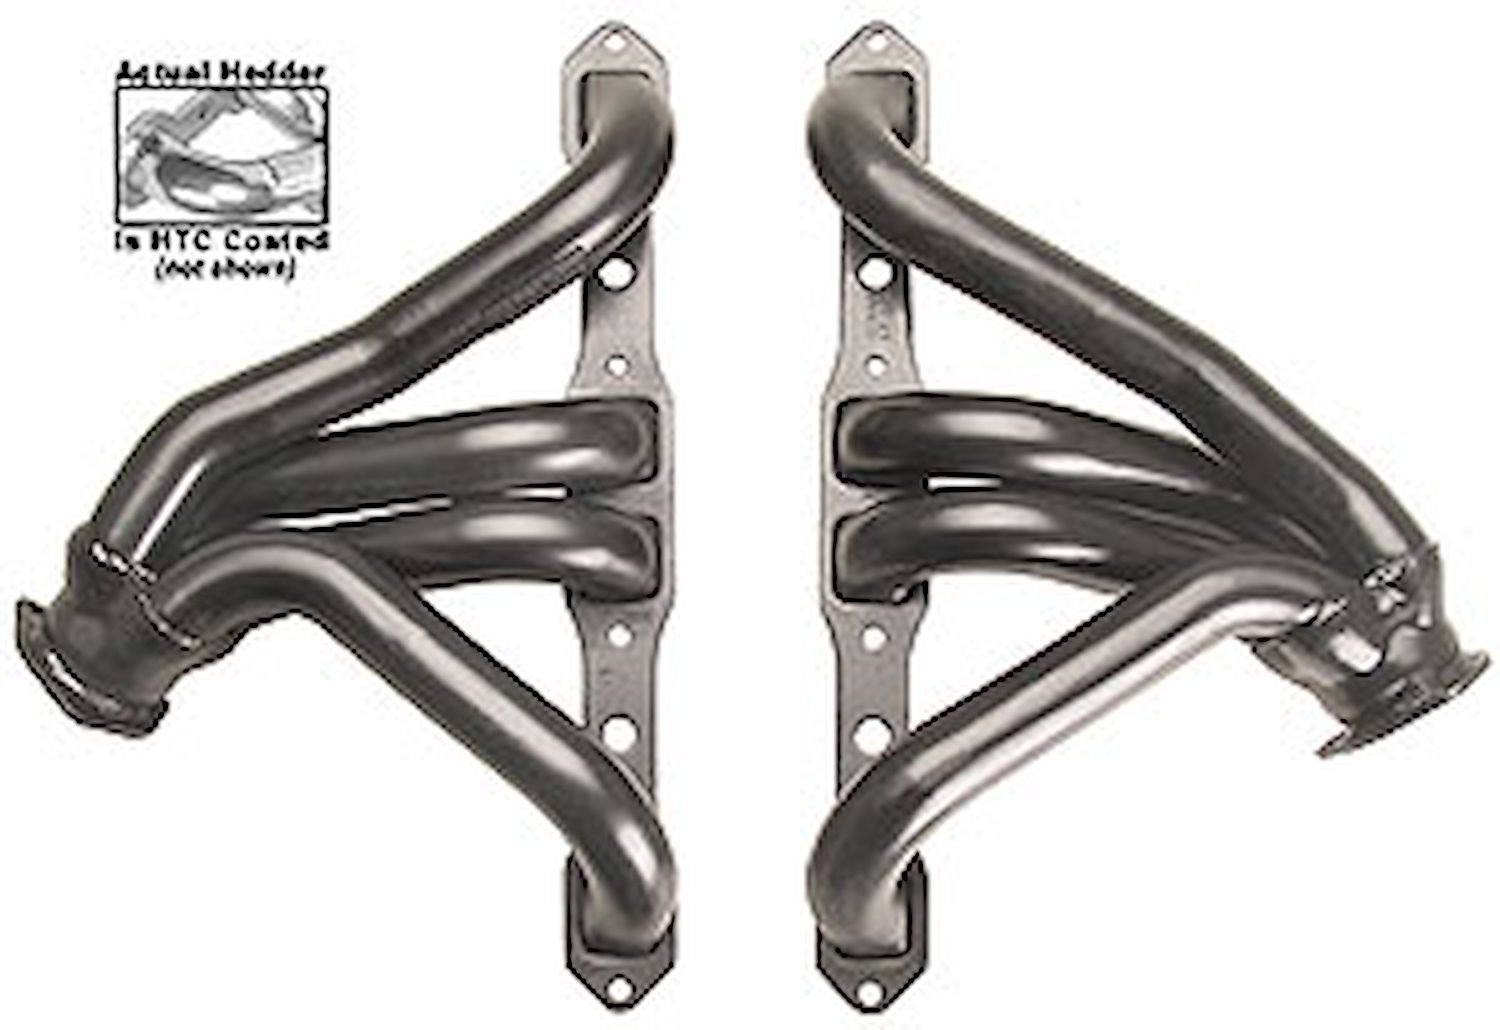 Standard Duty HTC Coated Shorty Headers 1965-74 Chrysler/Plymouth/Dodge 361-440